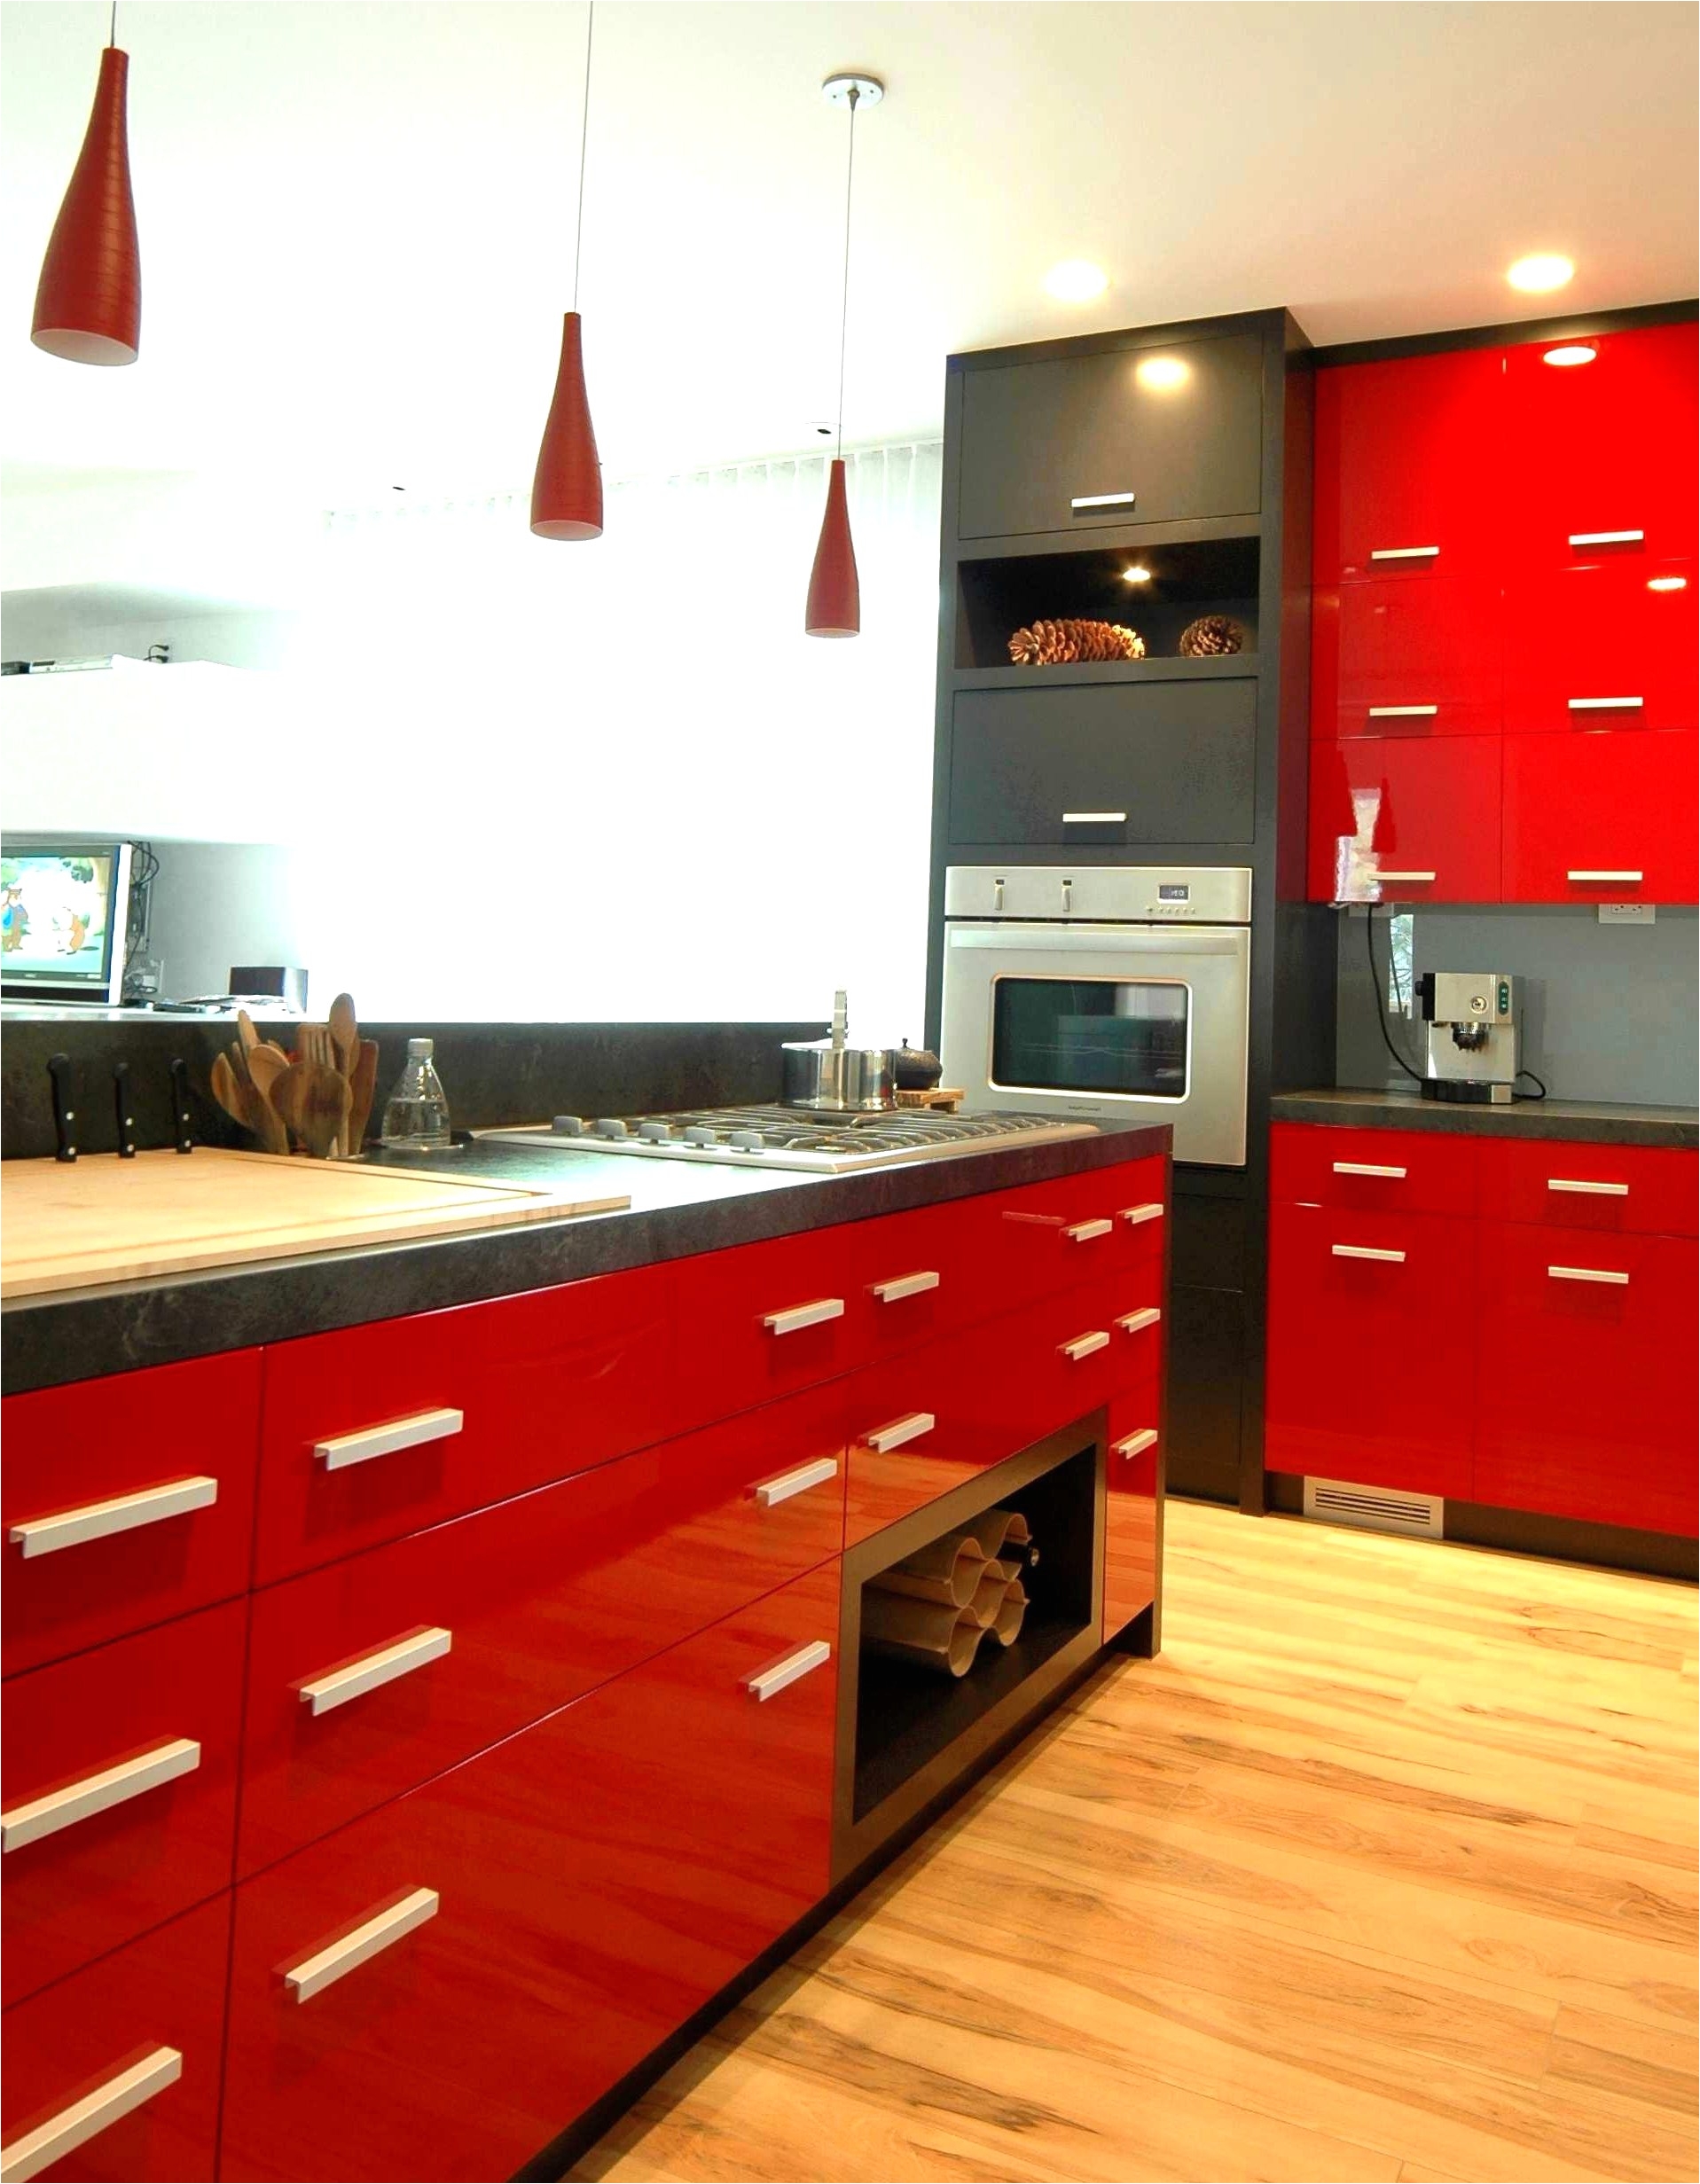 Glass Kitchen Cabinets New Kitchen Tiles Color Kitchen Cabinet 0d from glass kitchen cabinets image source socialsharknyc